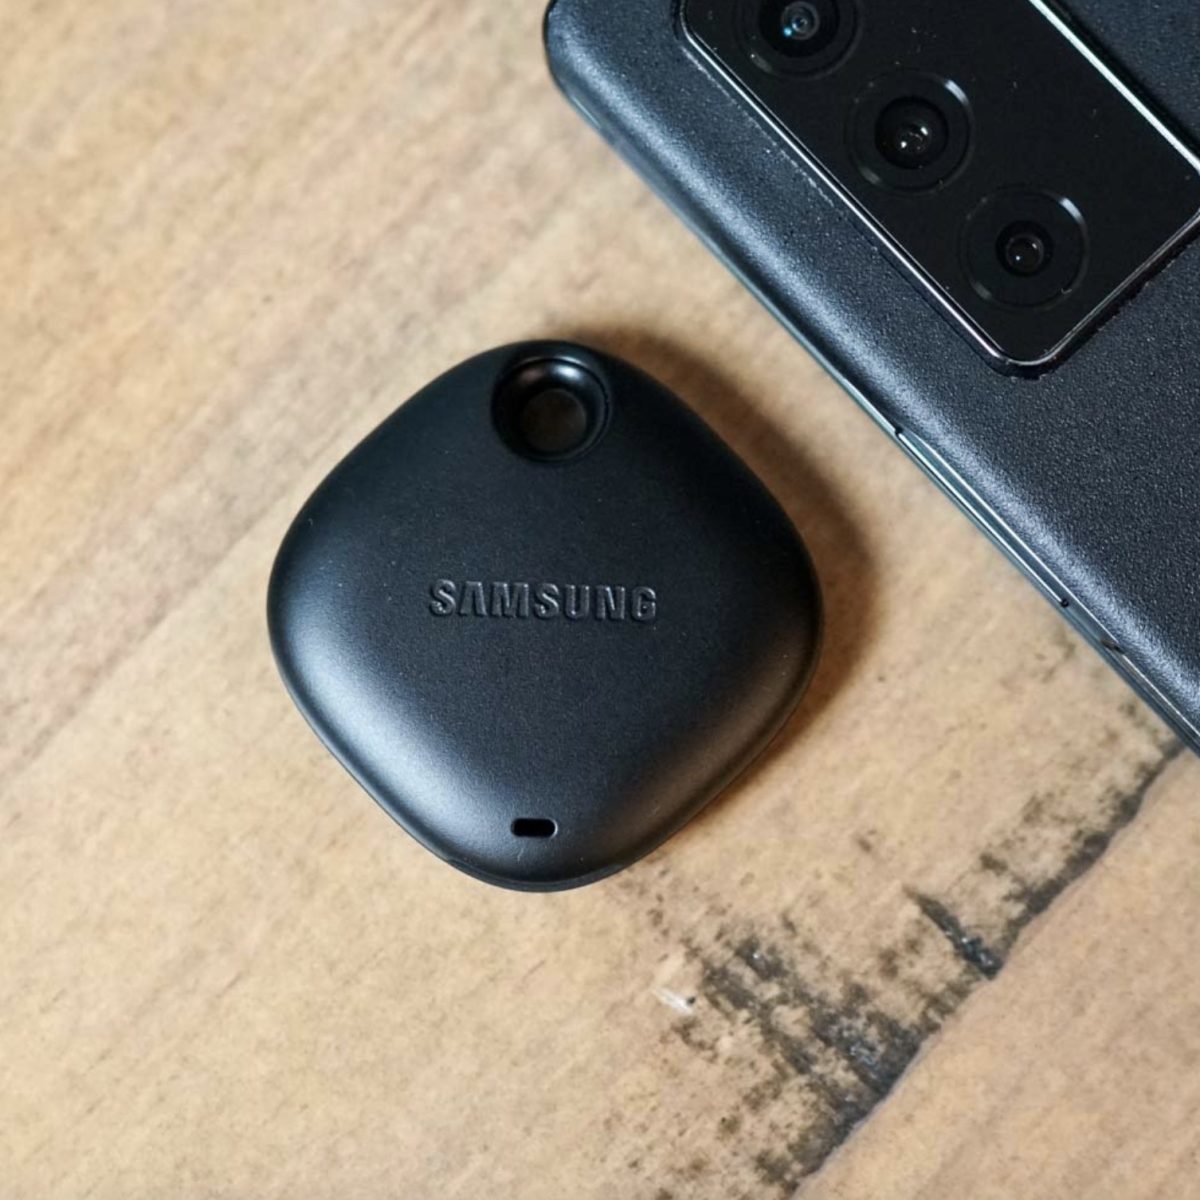 Here's the New Samsung Galaxy SmartTag 2